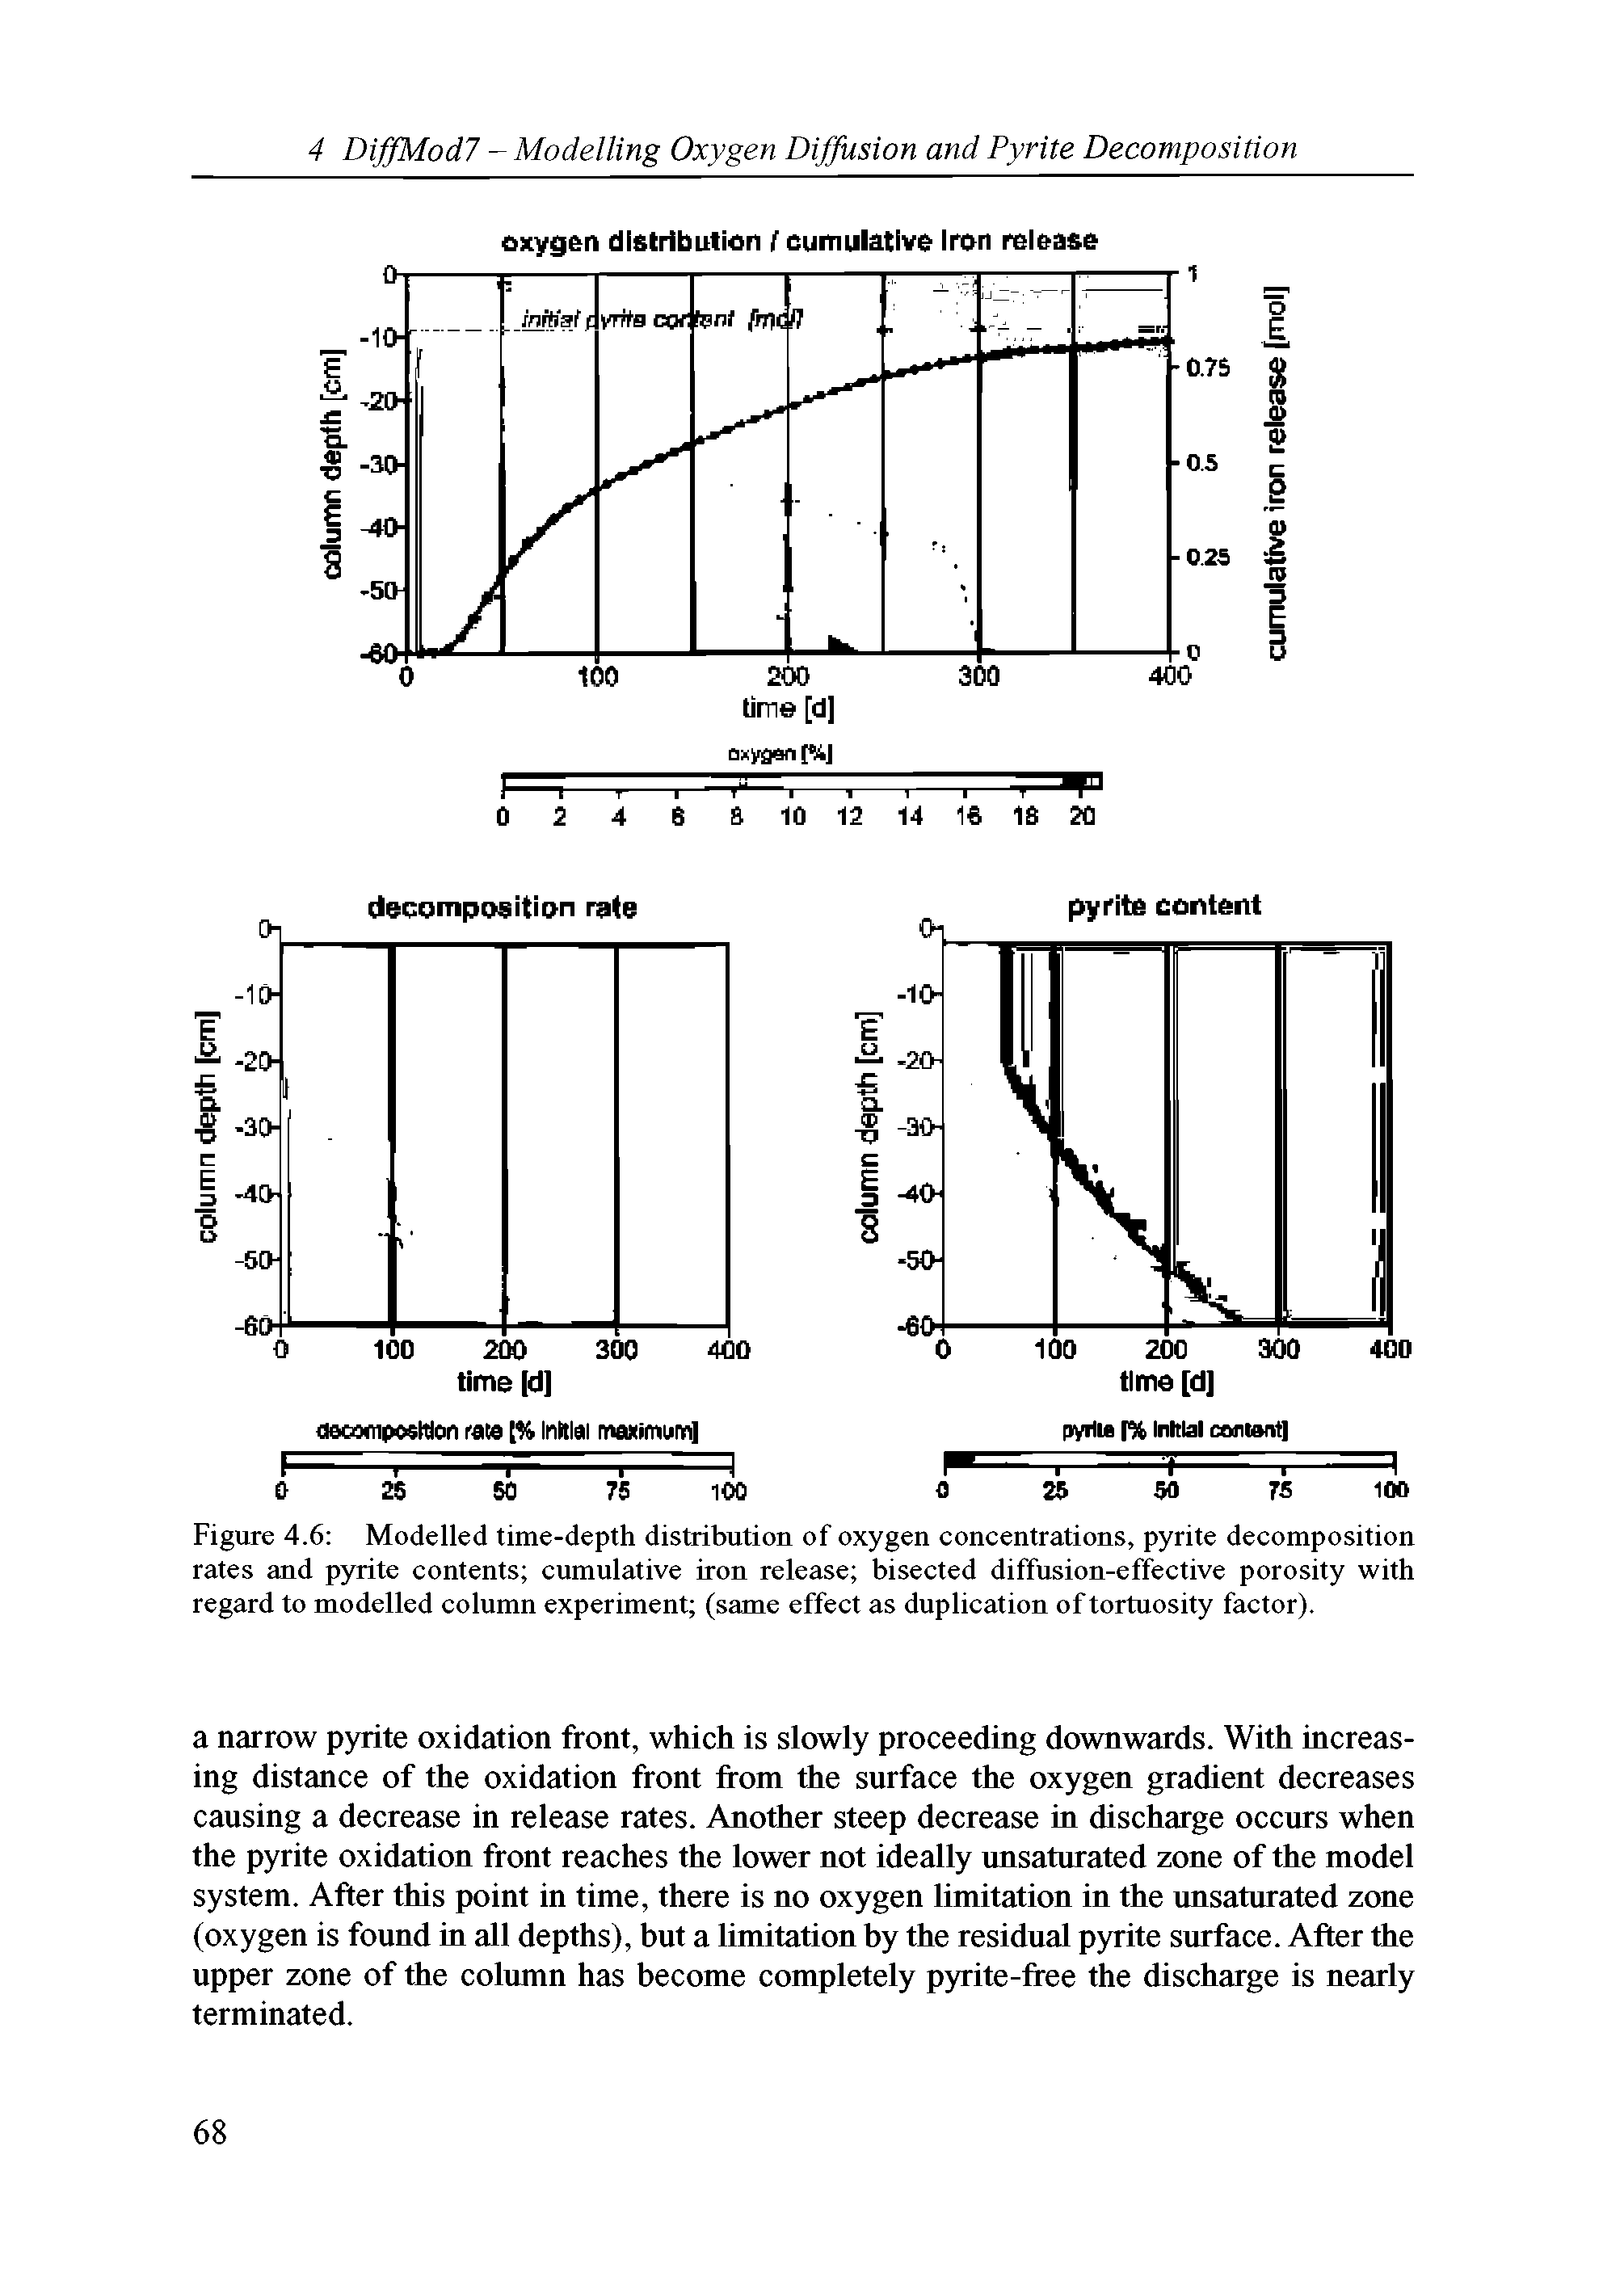 Figure 4.6 Modelled time-depth distribution of oxygen concentrations, pyrite decomposition rates and pyrite contents cumulative iron release bisected diffusion-effective porosity with regard to modelled column experiment (same effect as duplication of tortuosity factor).